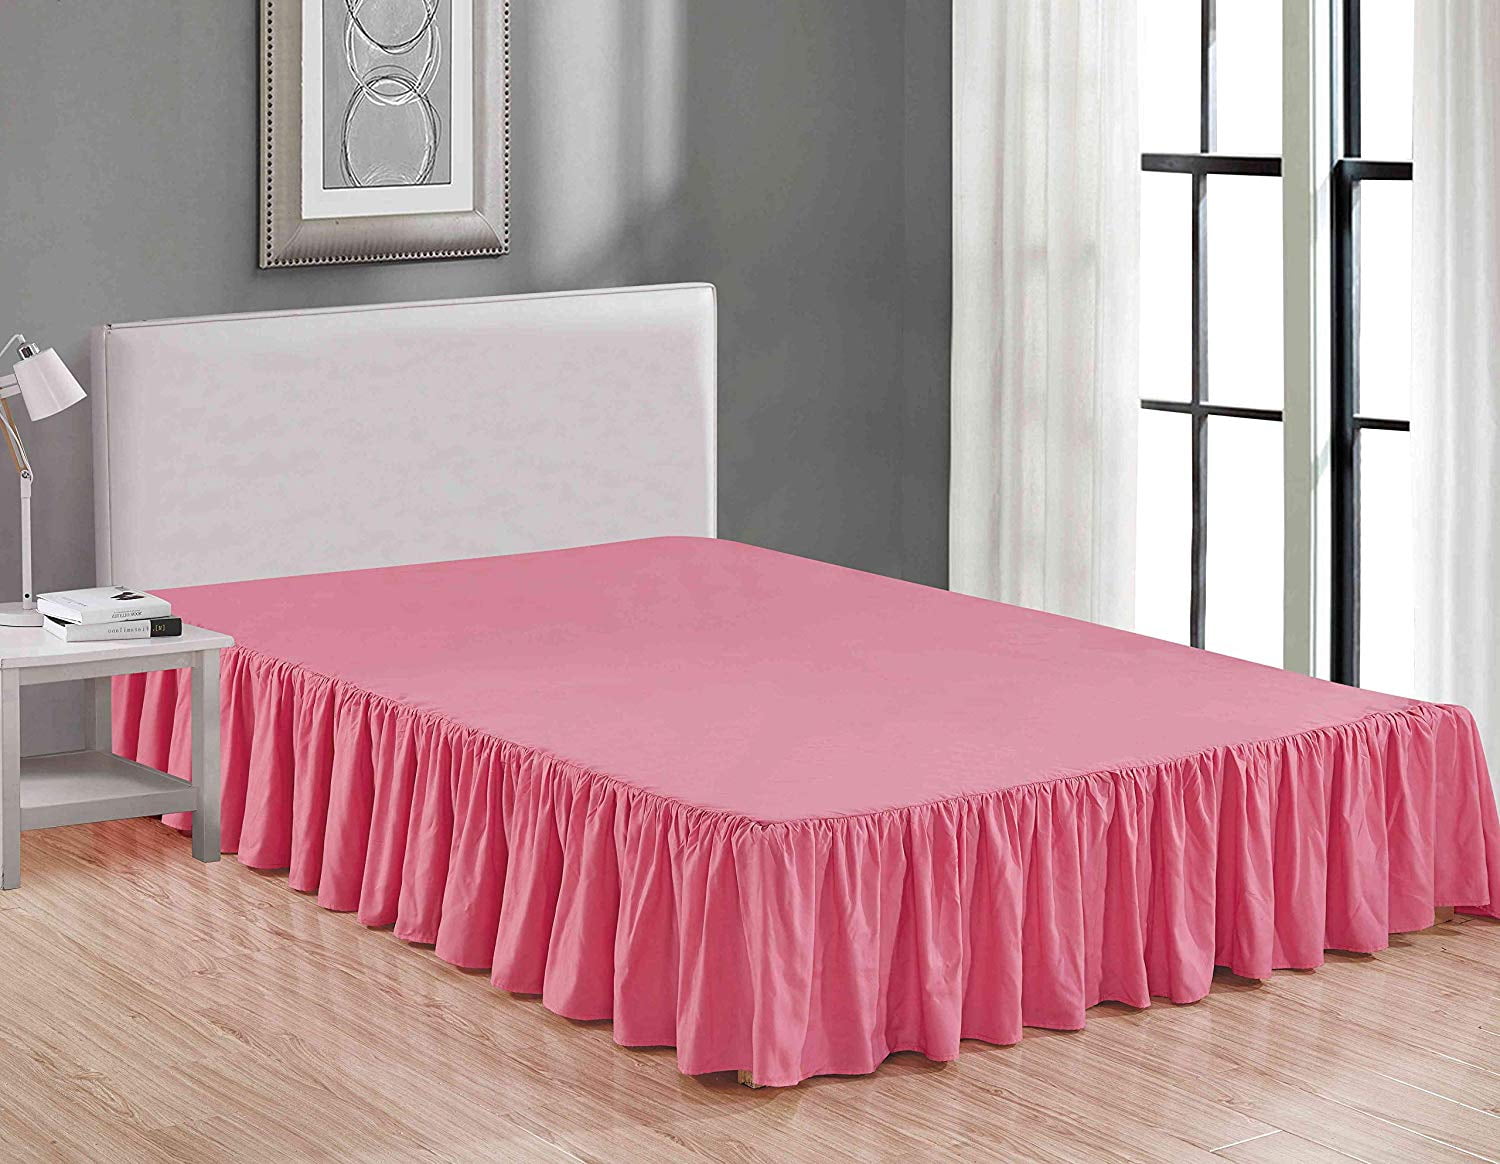 14” Drop Dust Ruffle Full Coral Pink Solid Luxury Pleated Tailored Bed Skirt 